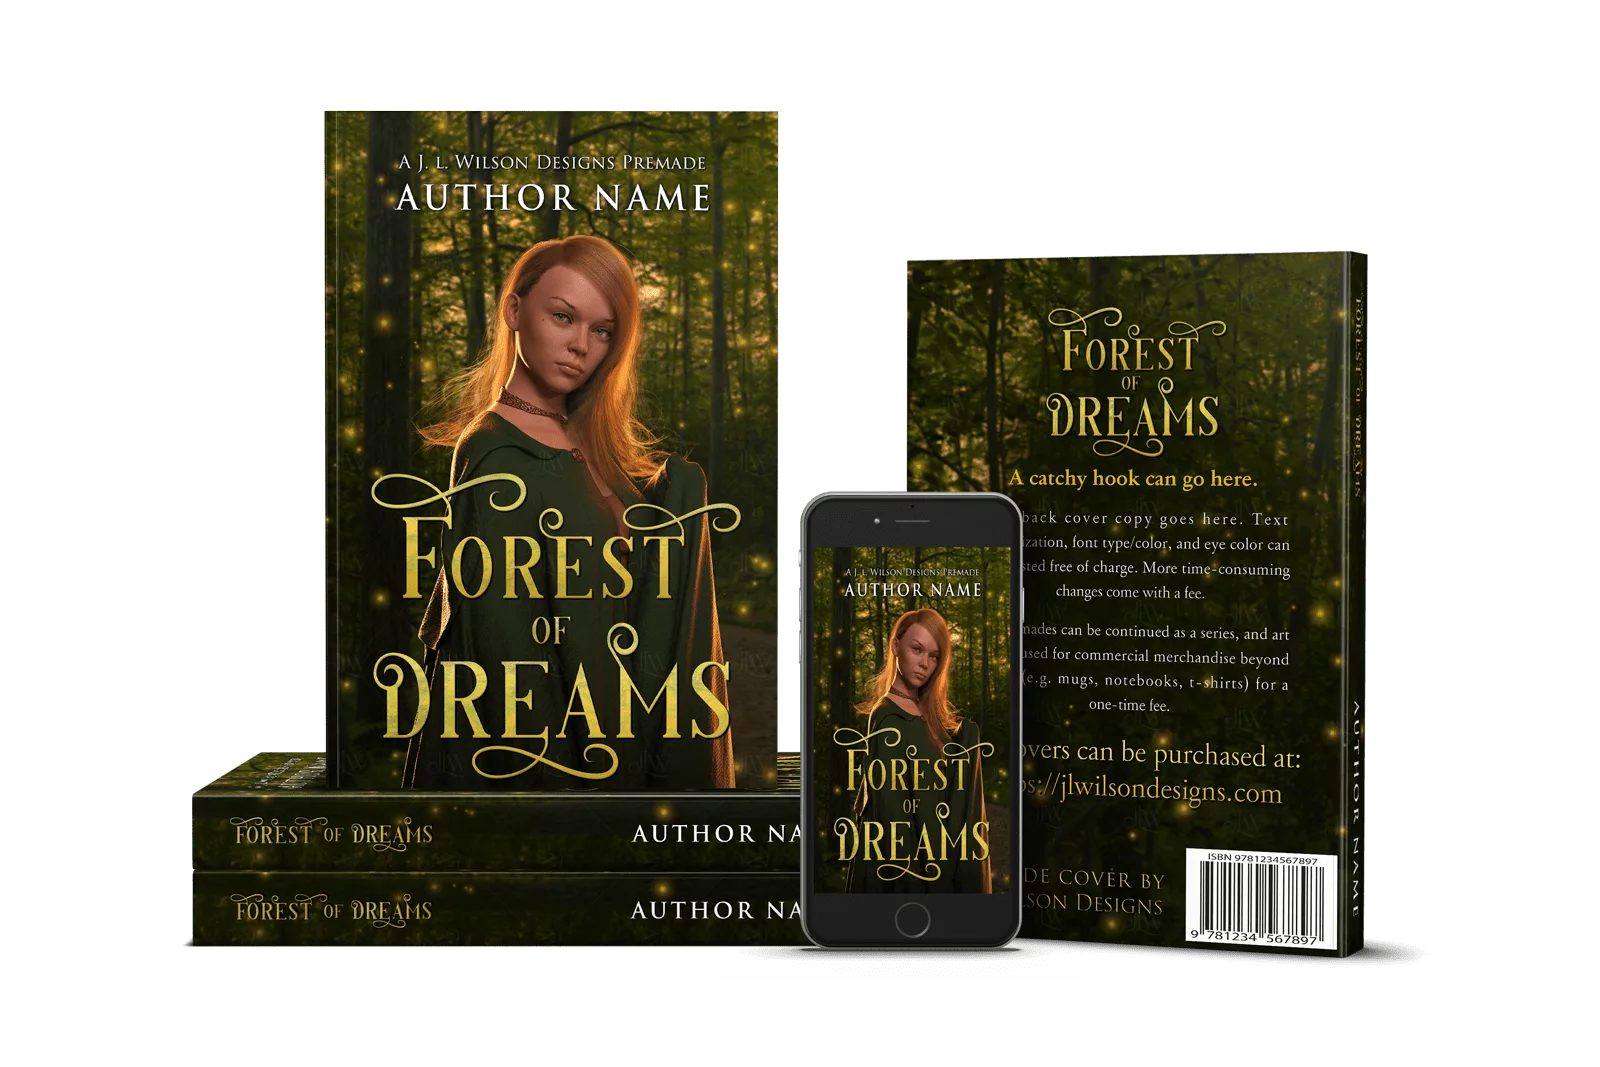 A fantasy book cover with a beautiful woman in a green cloak in a magical glowing forest